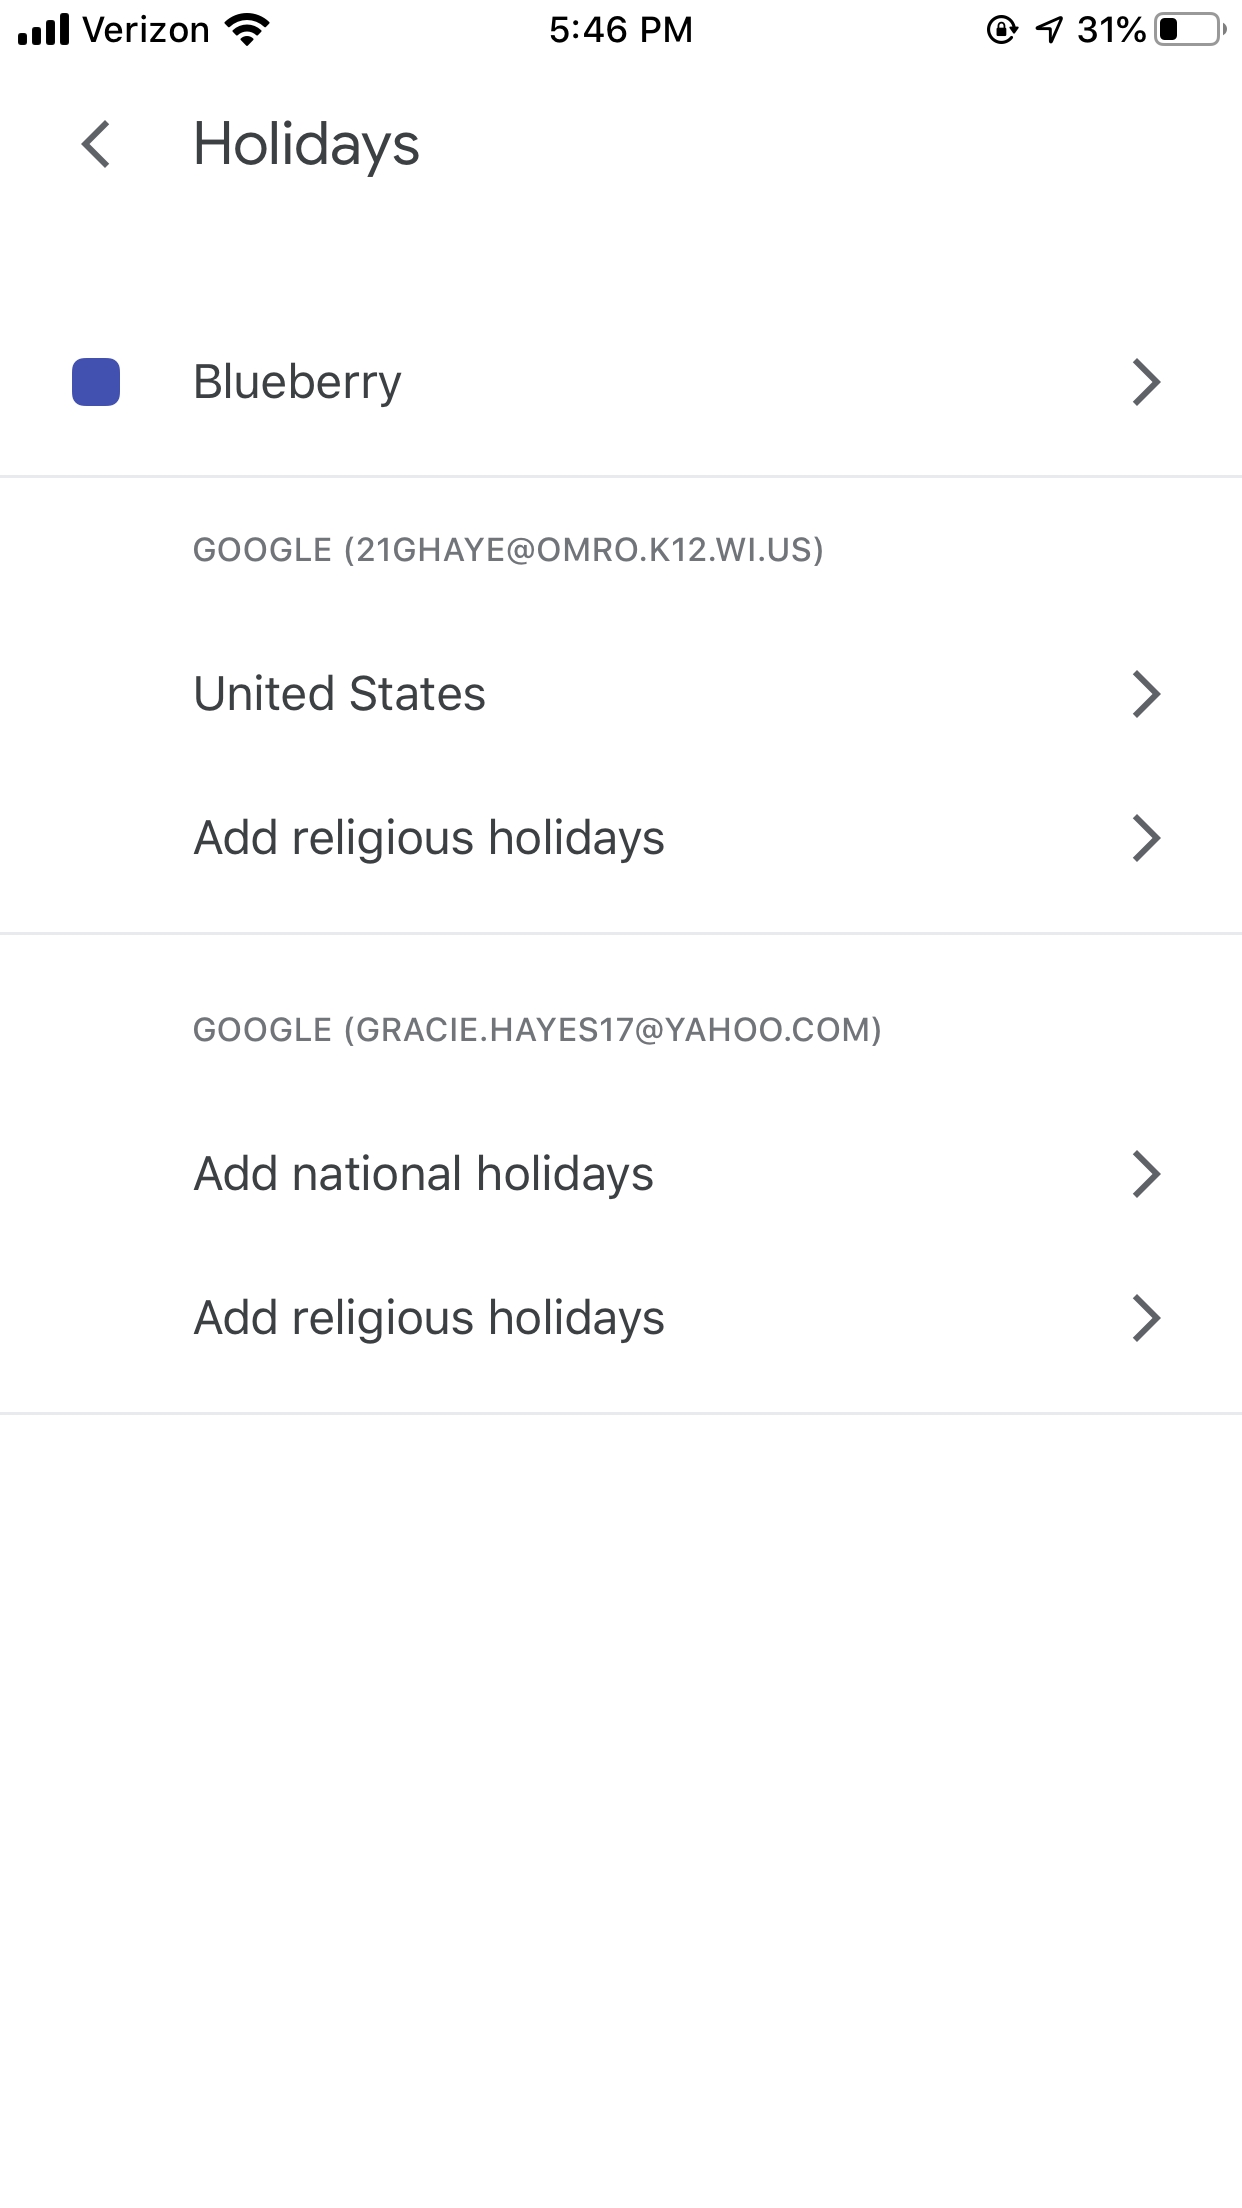 How Do I Turn Off Holidays On Just 1 Account? - Calendar Help-Holidays Listed Twice In Google Calender